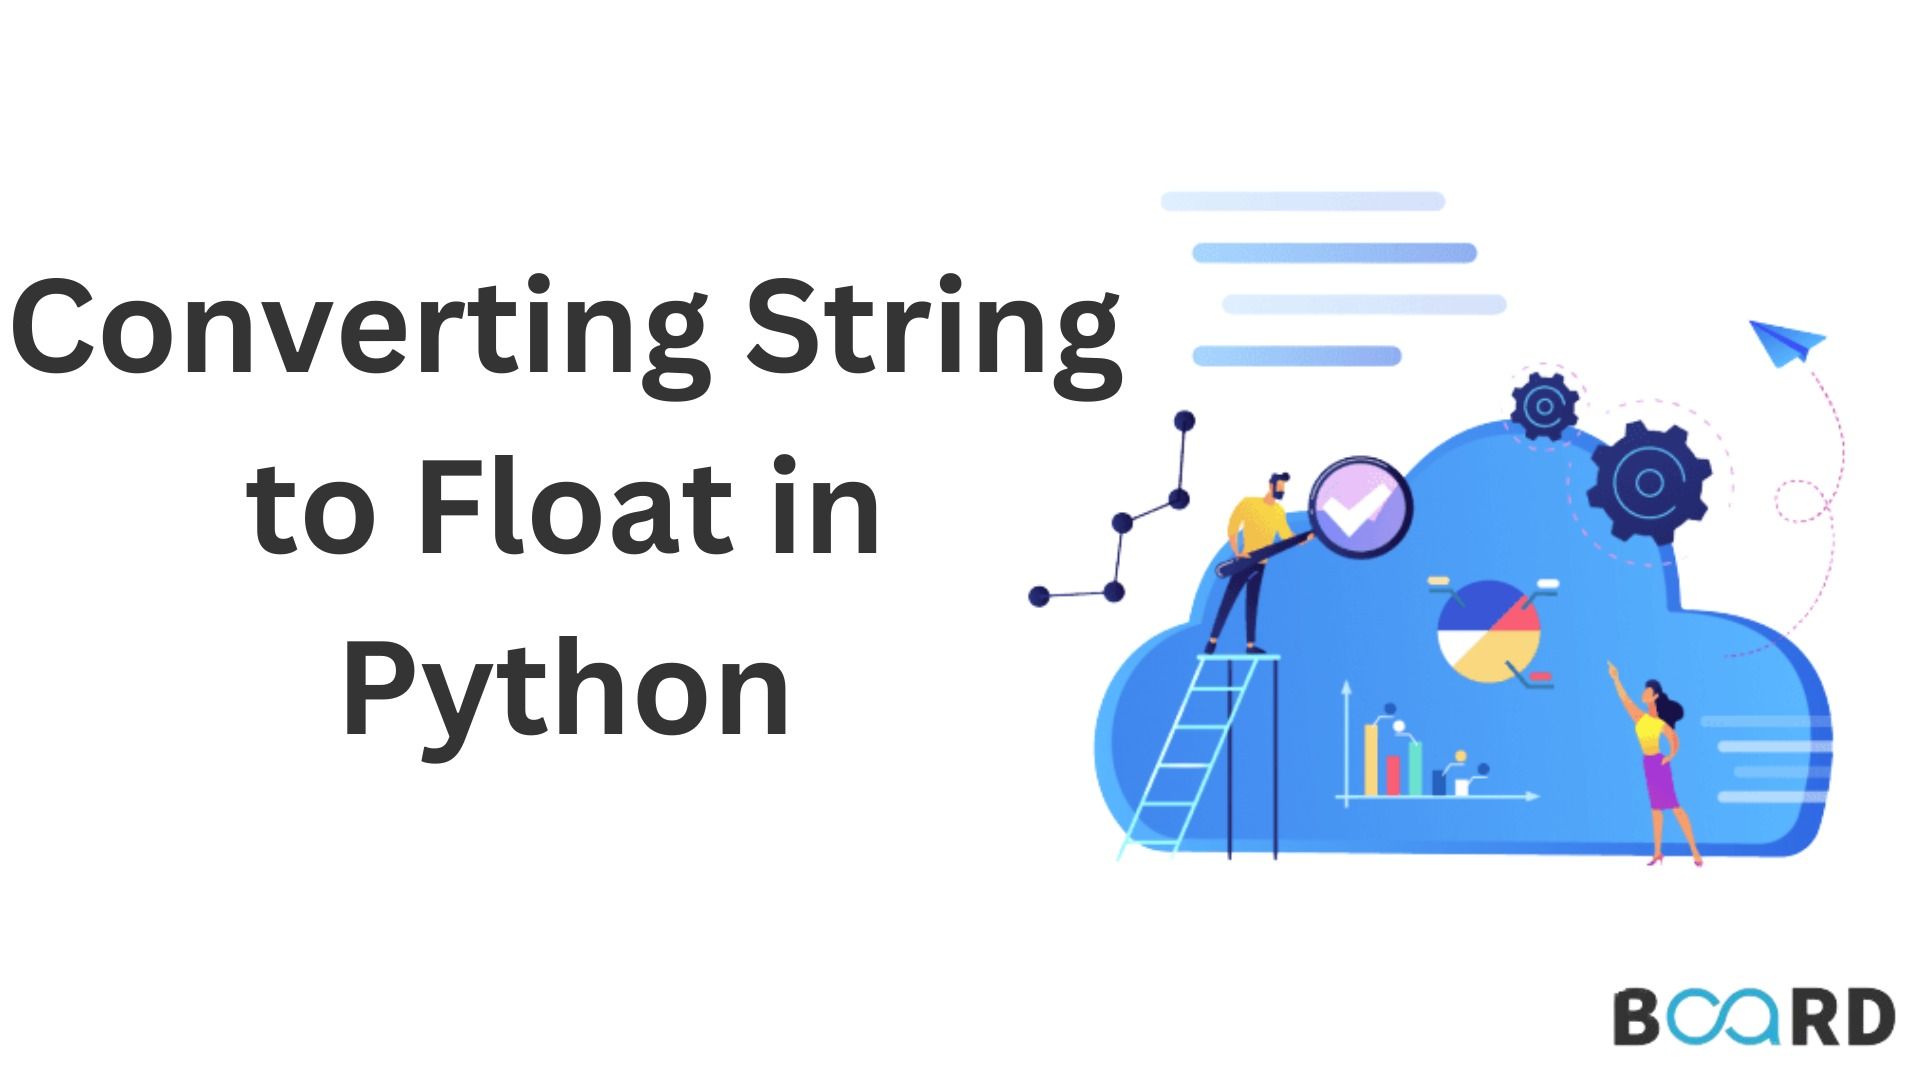 Converting String to Float in Python